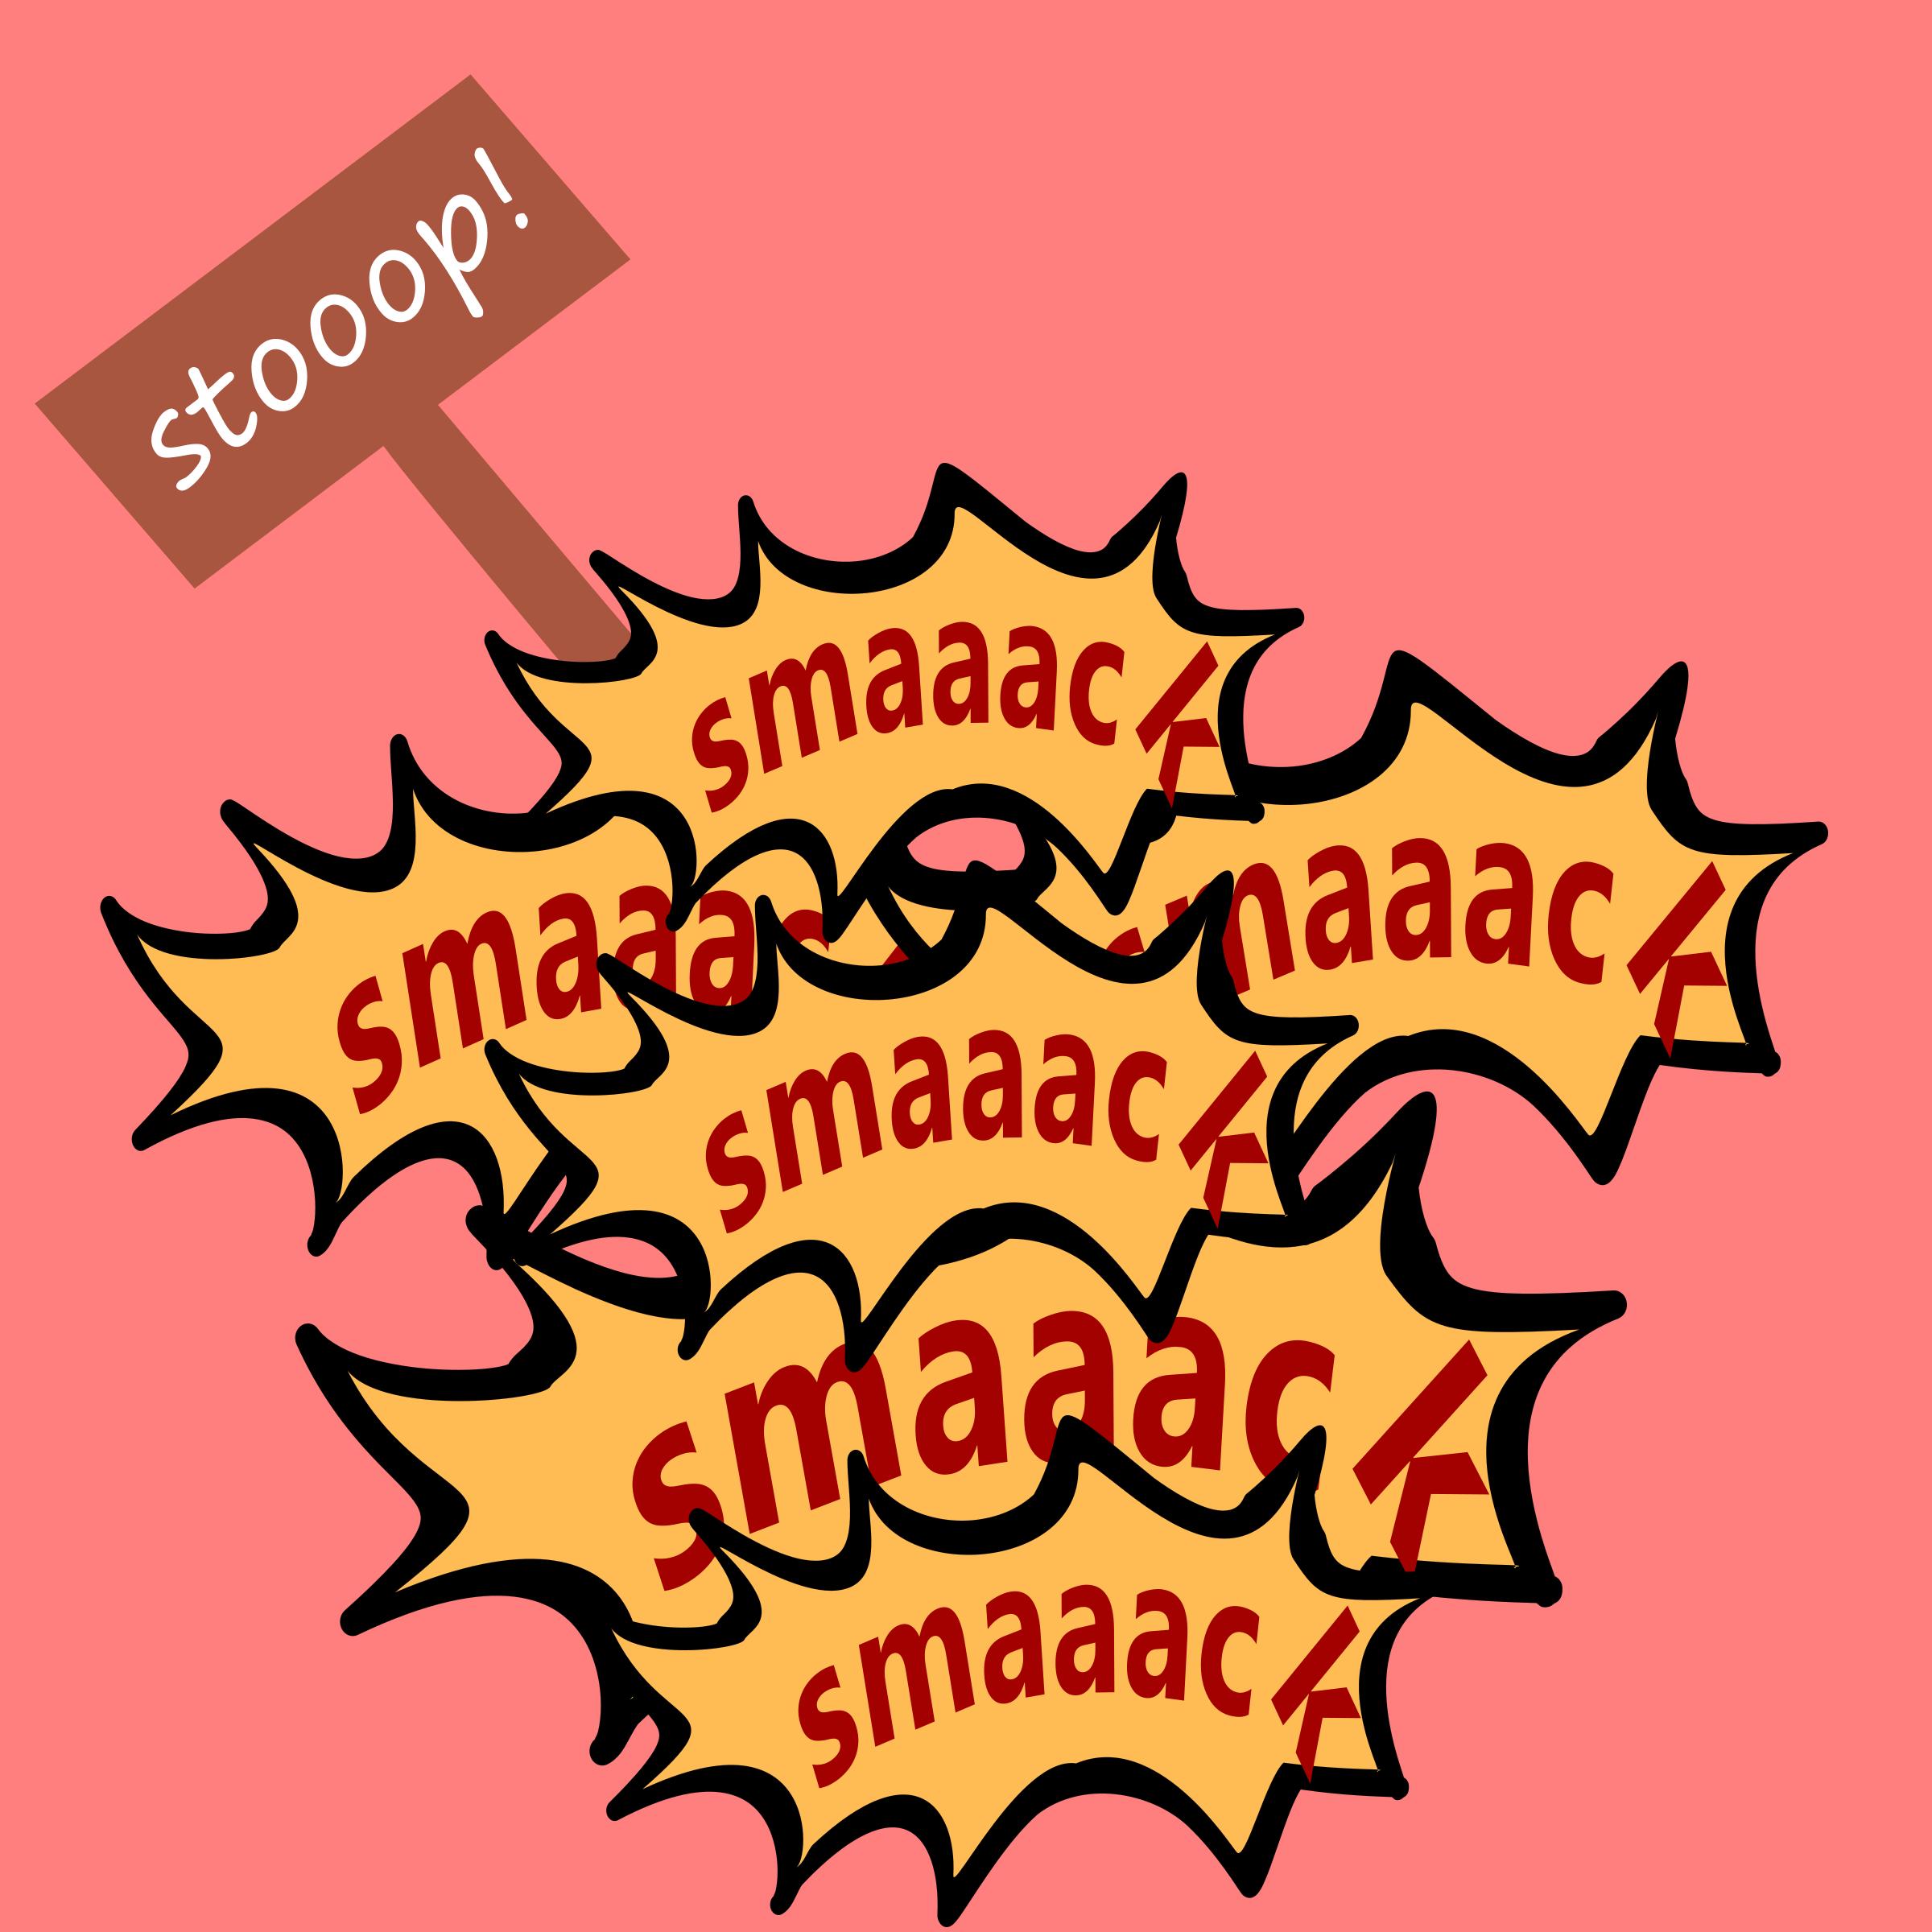 Smack-animation-remix png